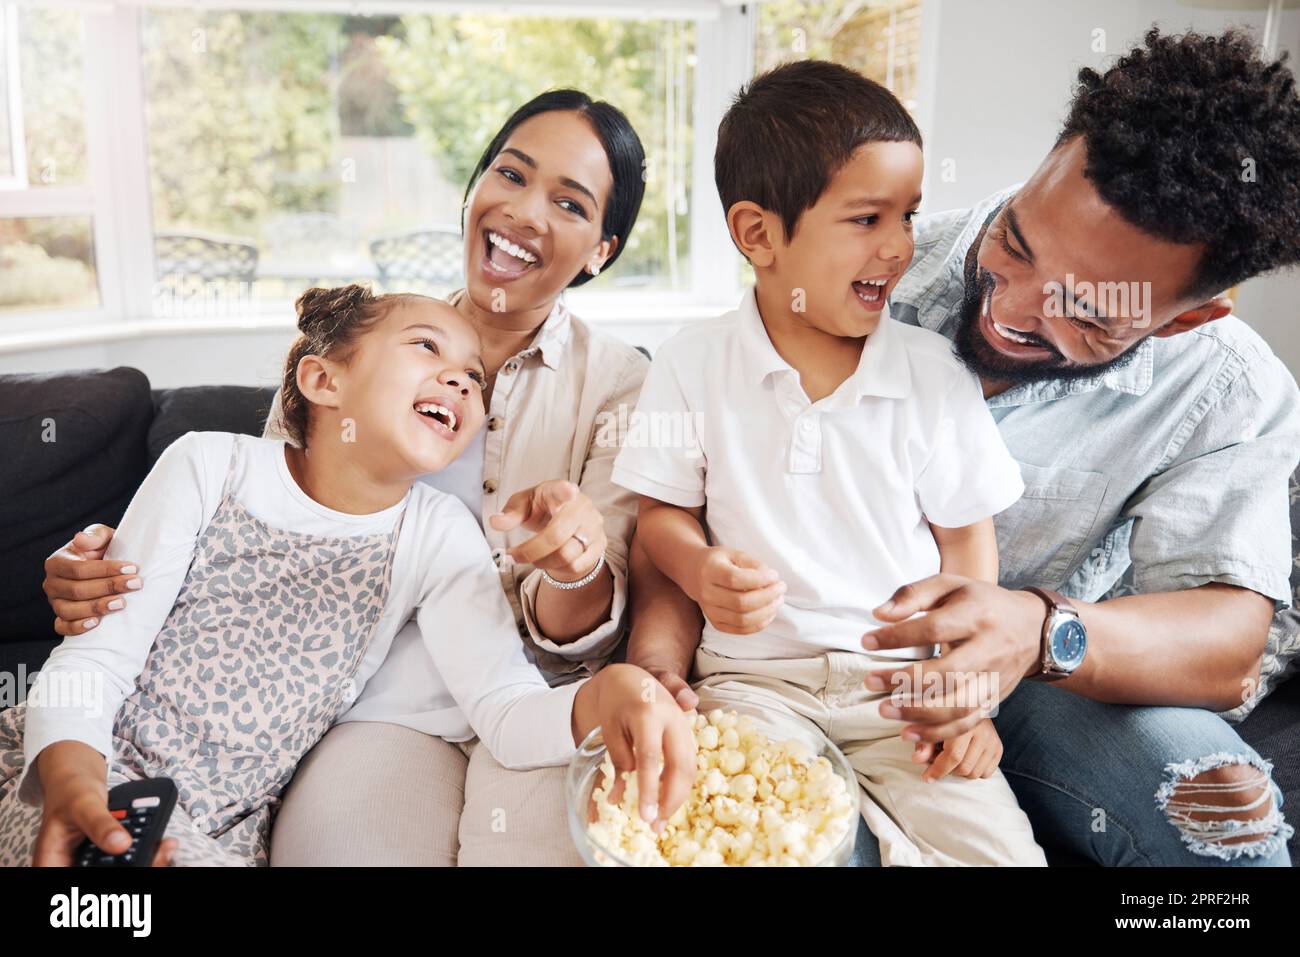 Family watching tv or a movie, having fun and eating popcorn together at home. Love and laughter with affectionate parents and happy children smiling, enjoying the weekend and feeling carefree Stock Photo